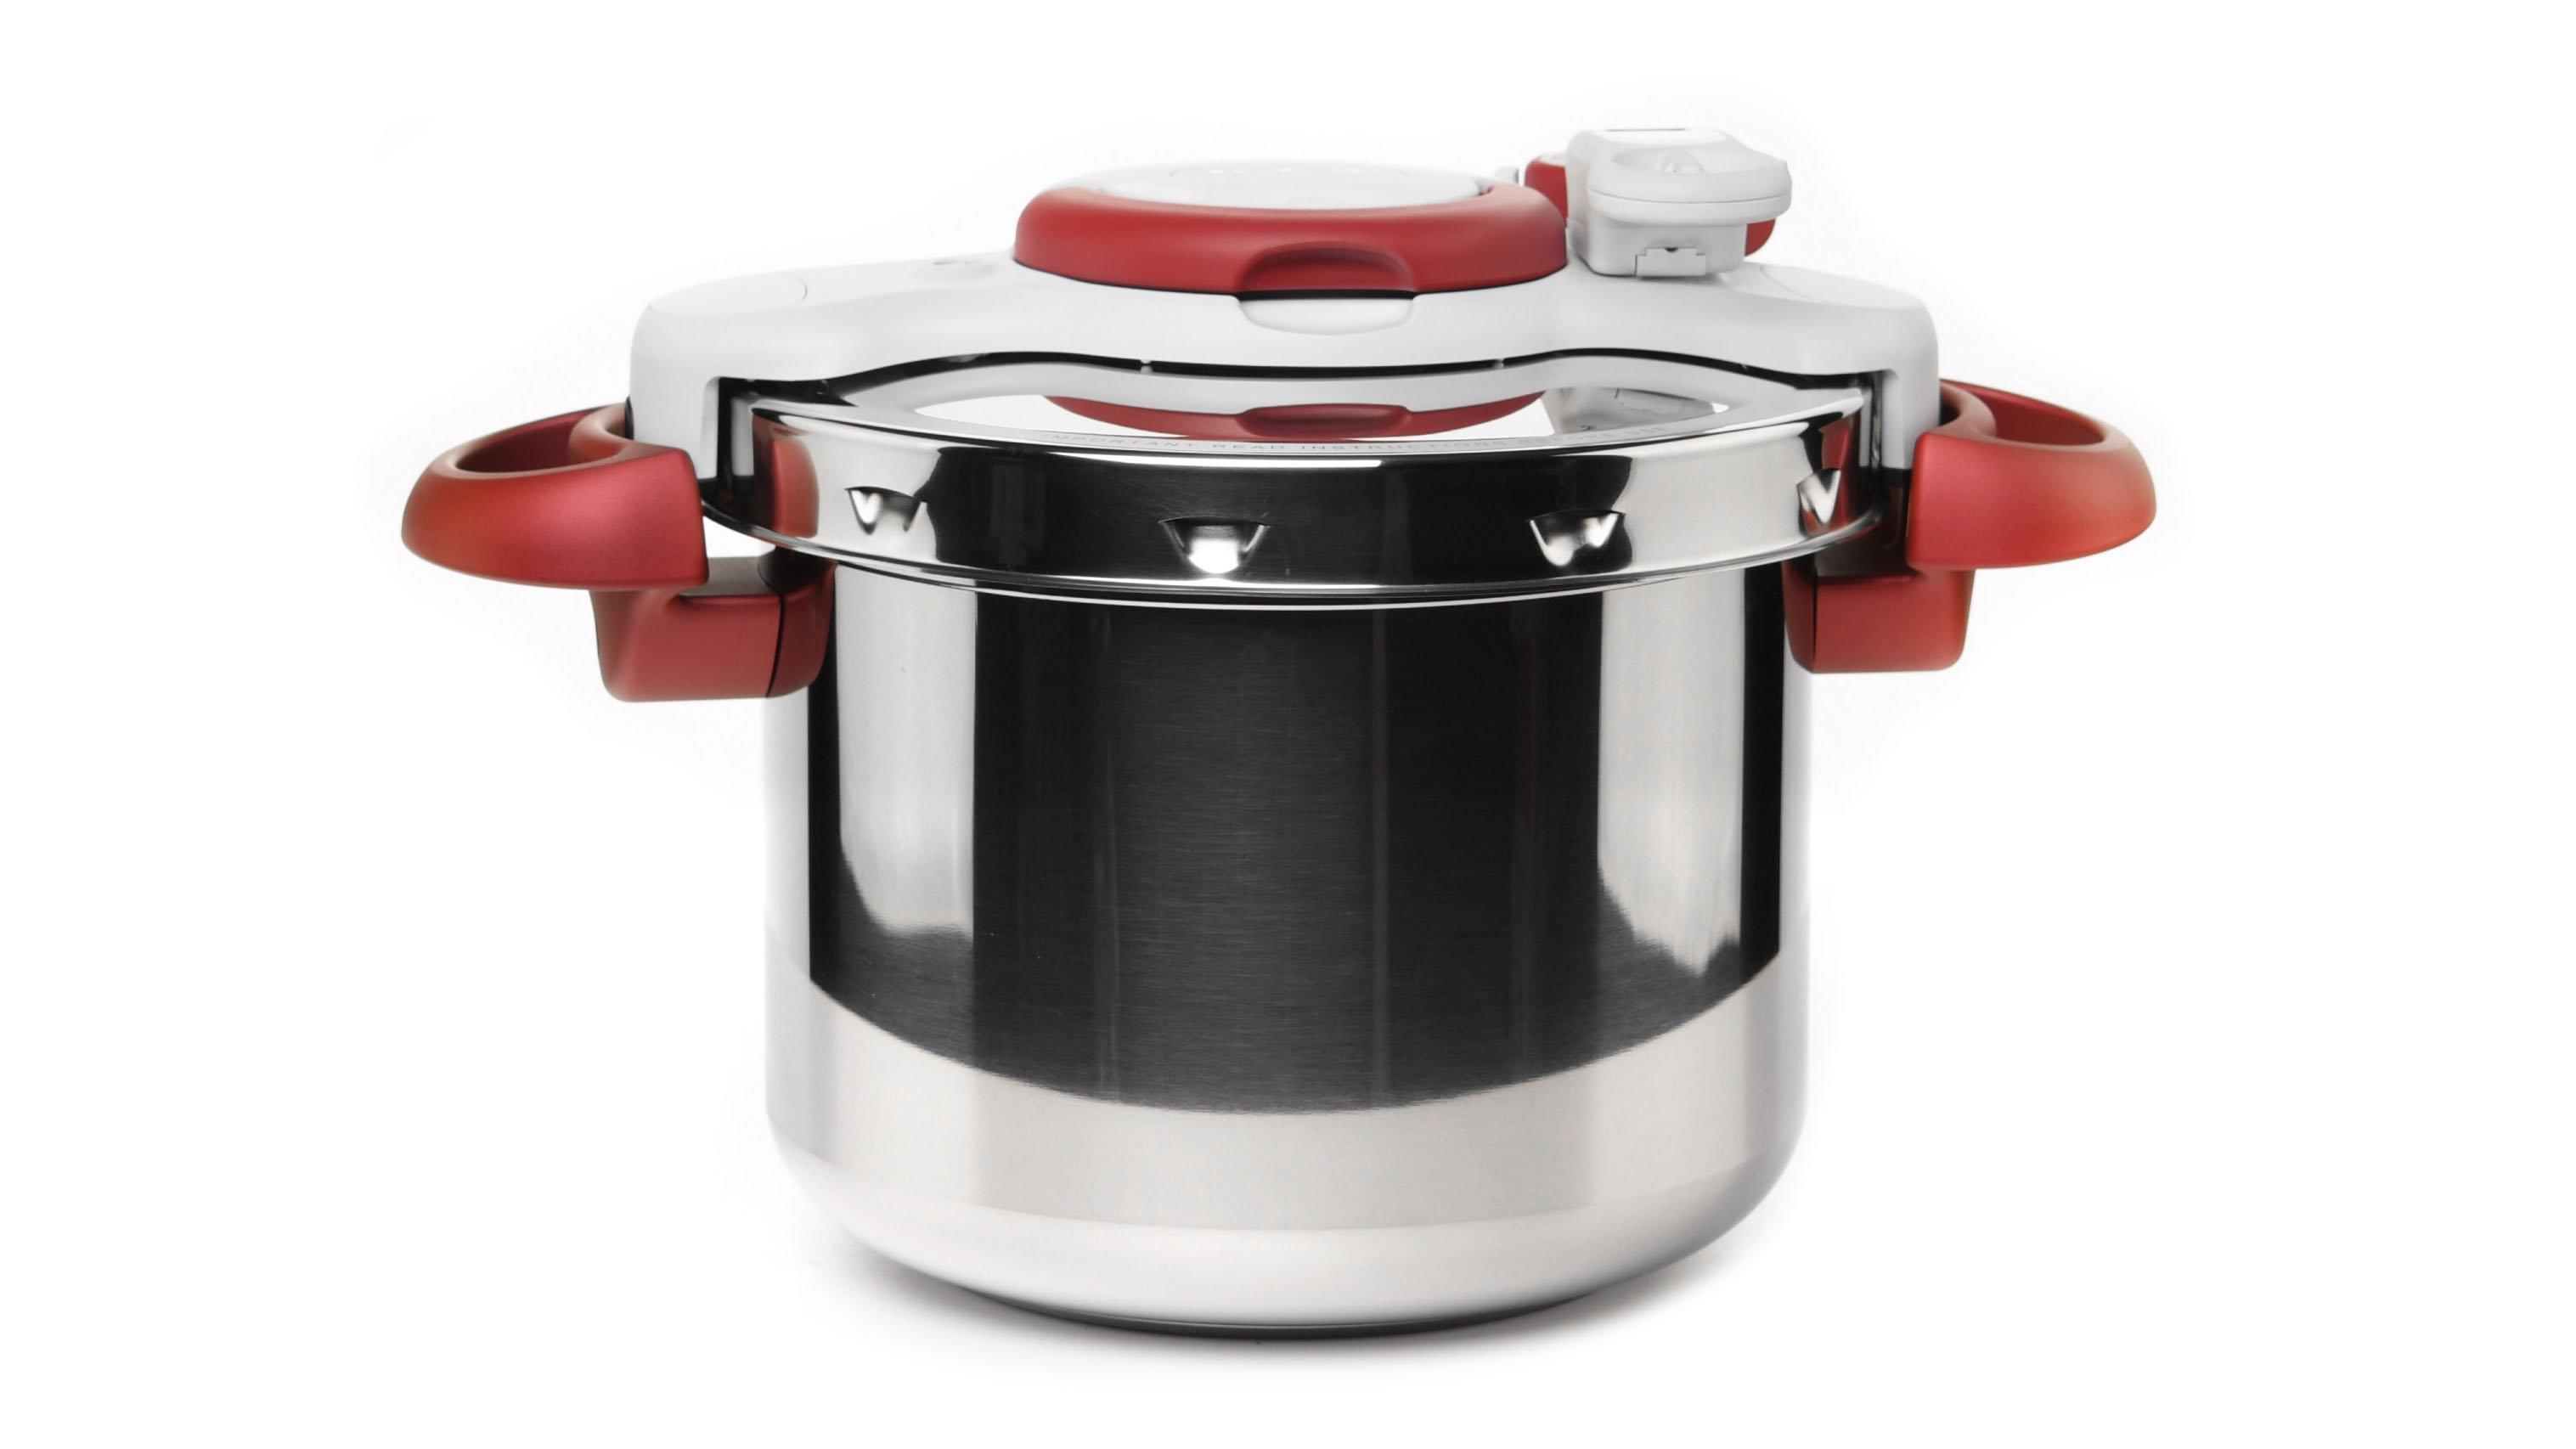 https://media.extra.com/s/aurora/100002596_800/Tefal-Clipso-Pressure-Cooker%2C-6-Cooking-Program-or-Rio-Red-and-Light-Grey?locale=en-GB,en-*,*